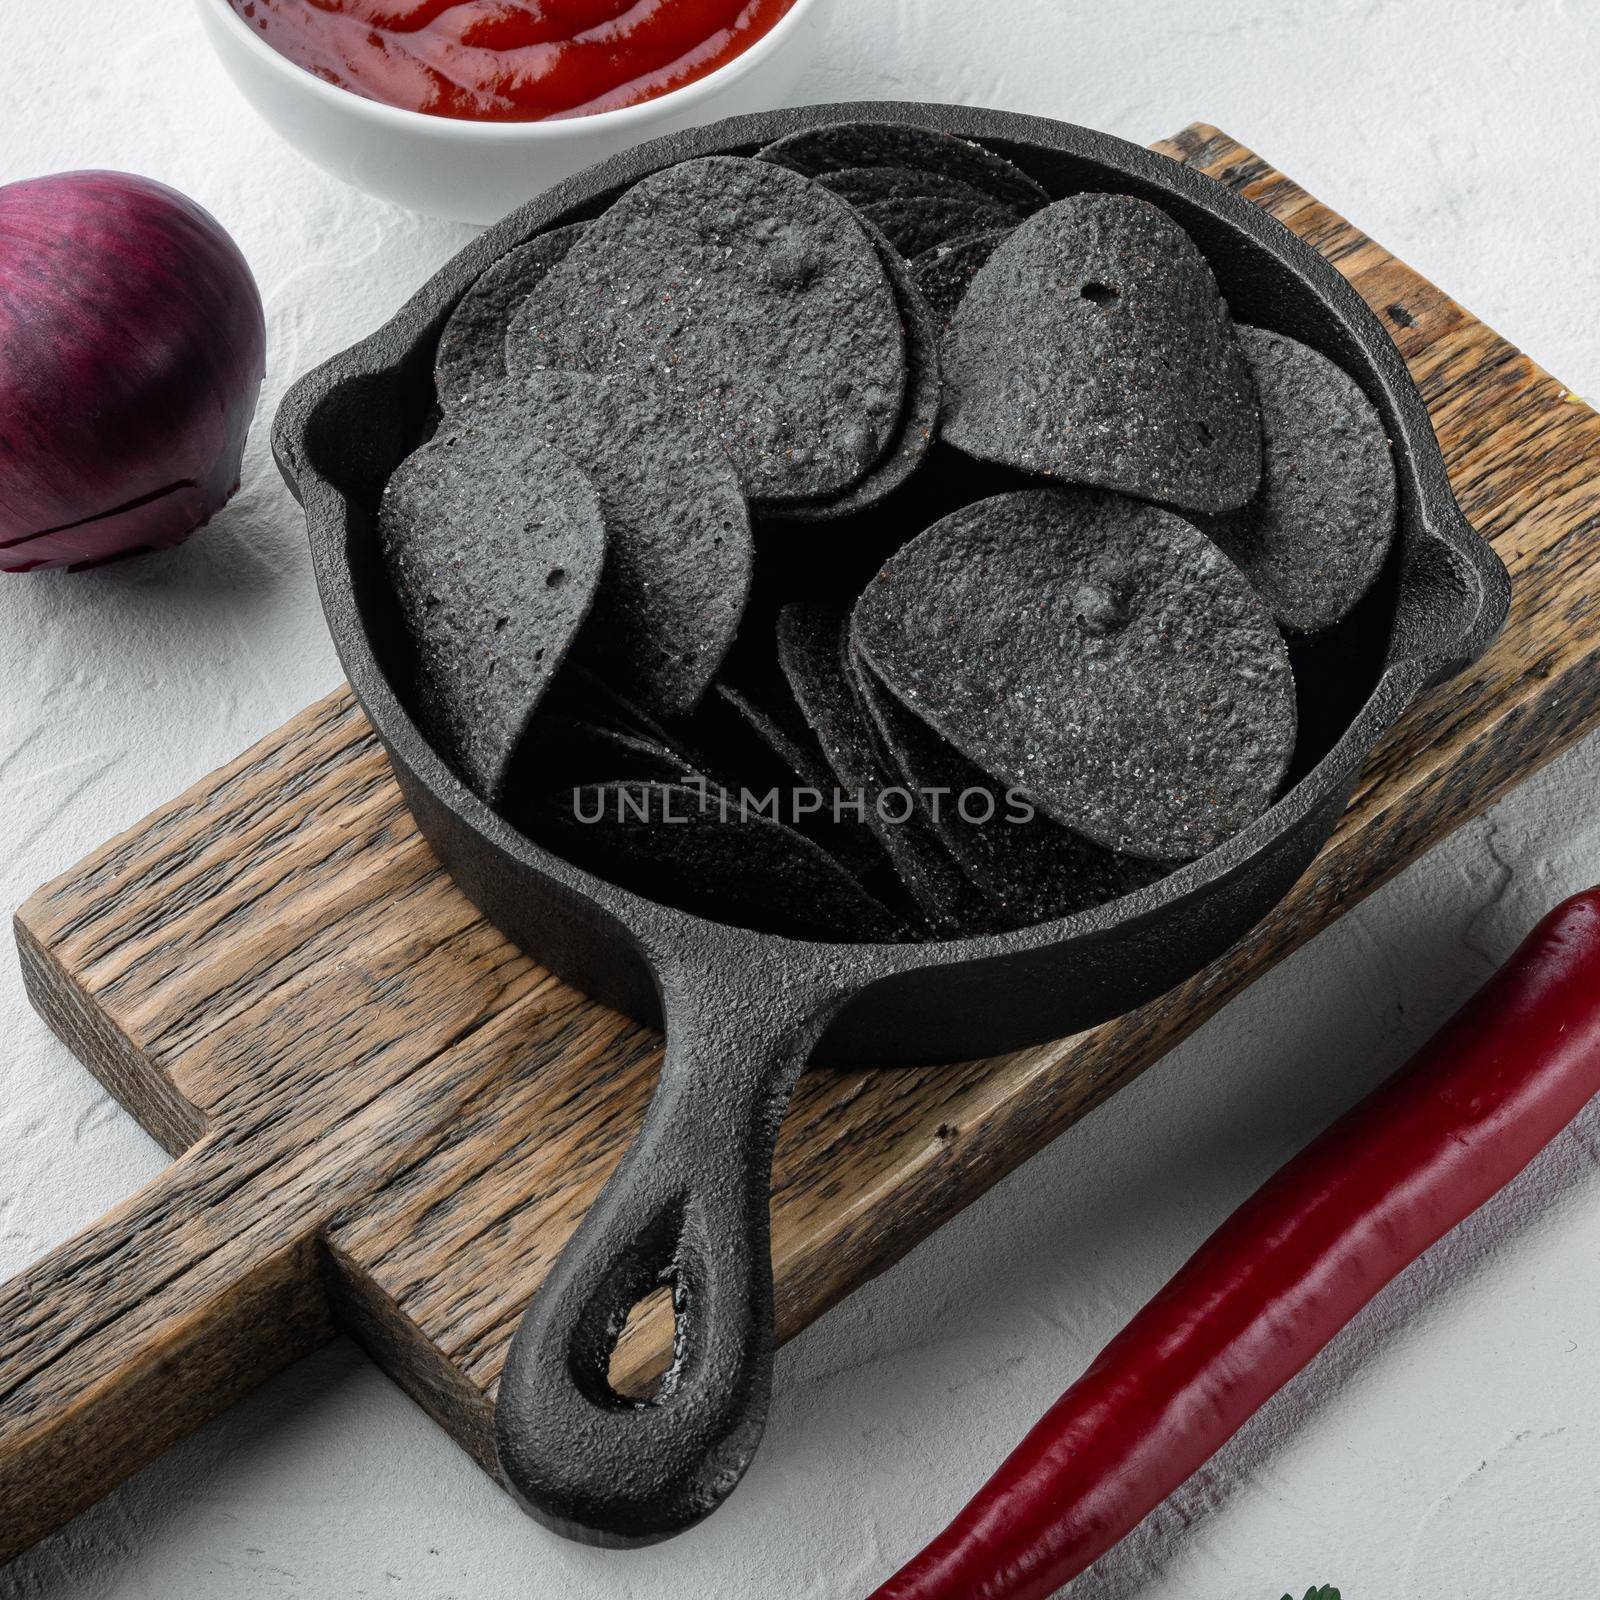 Black crispy potato chips, in cast iron frying pan, on white stone surface by Ilianesolenyi